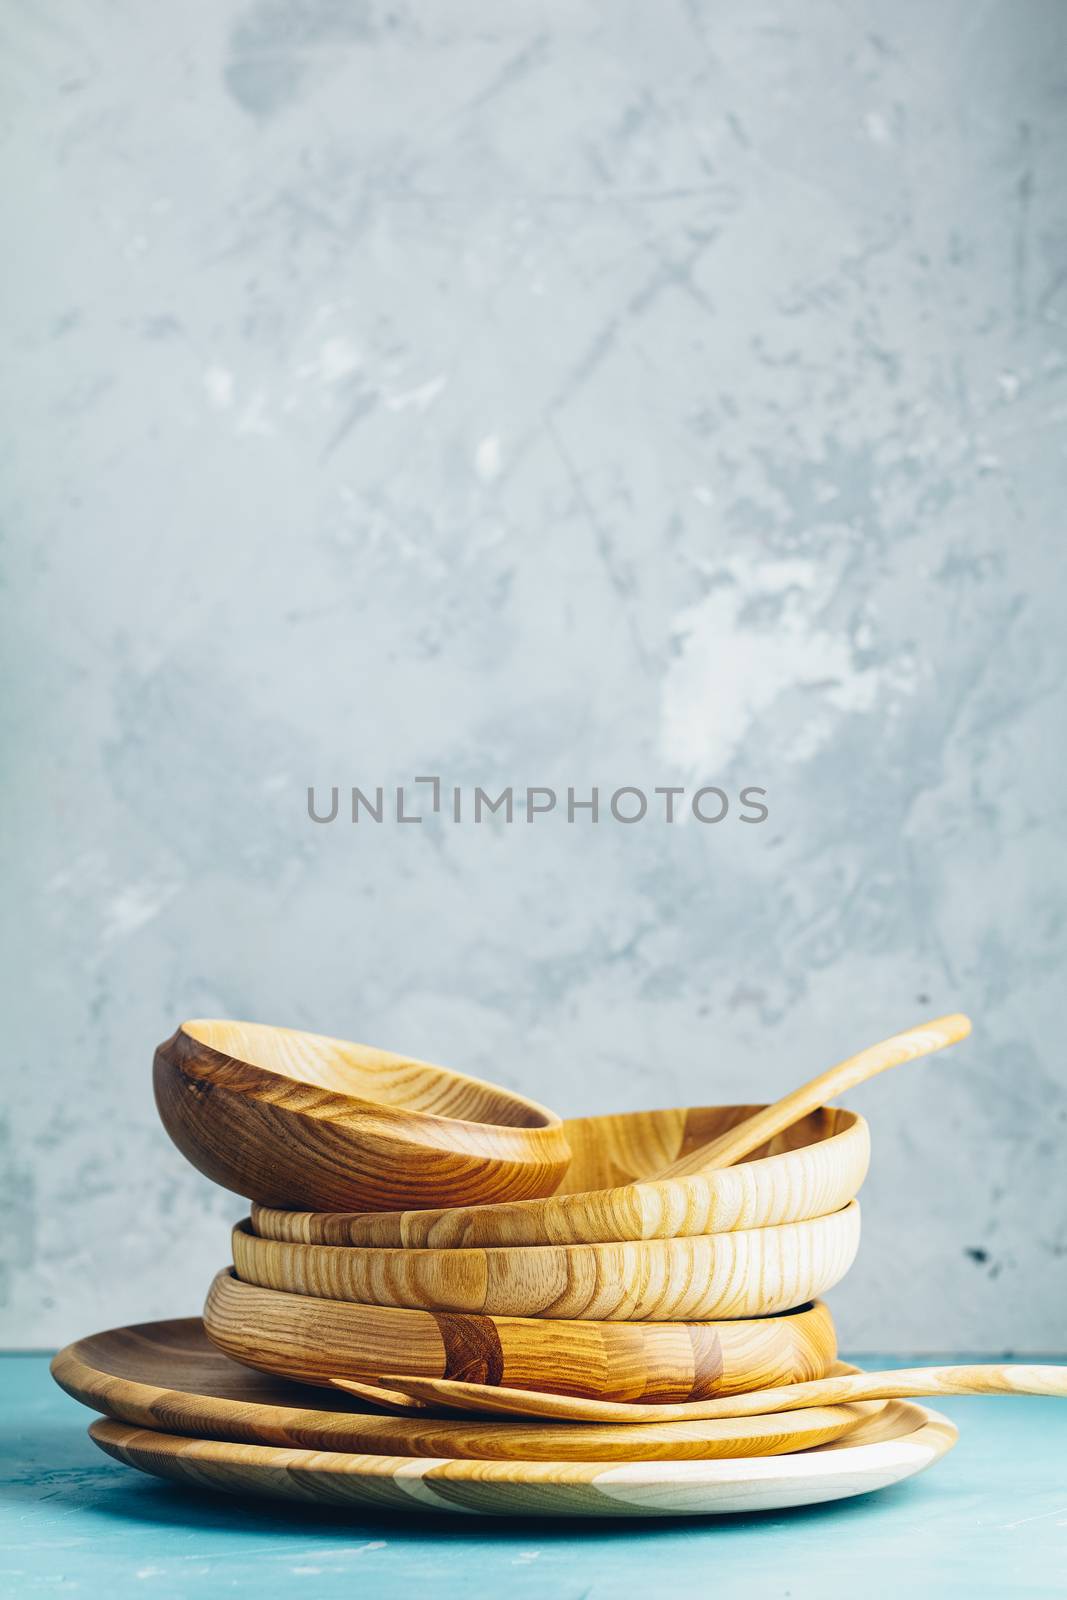 Variety of wooden bowl, wooden spoons for salad over blue texture background. Food or ecology kitchen concept. Copy space for you text.